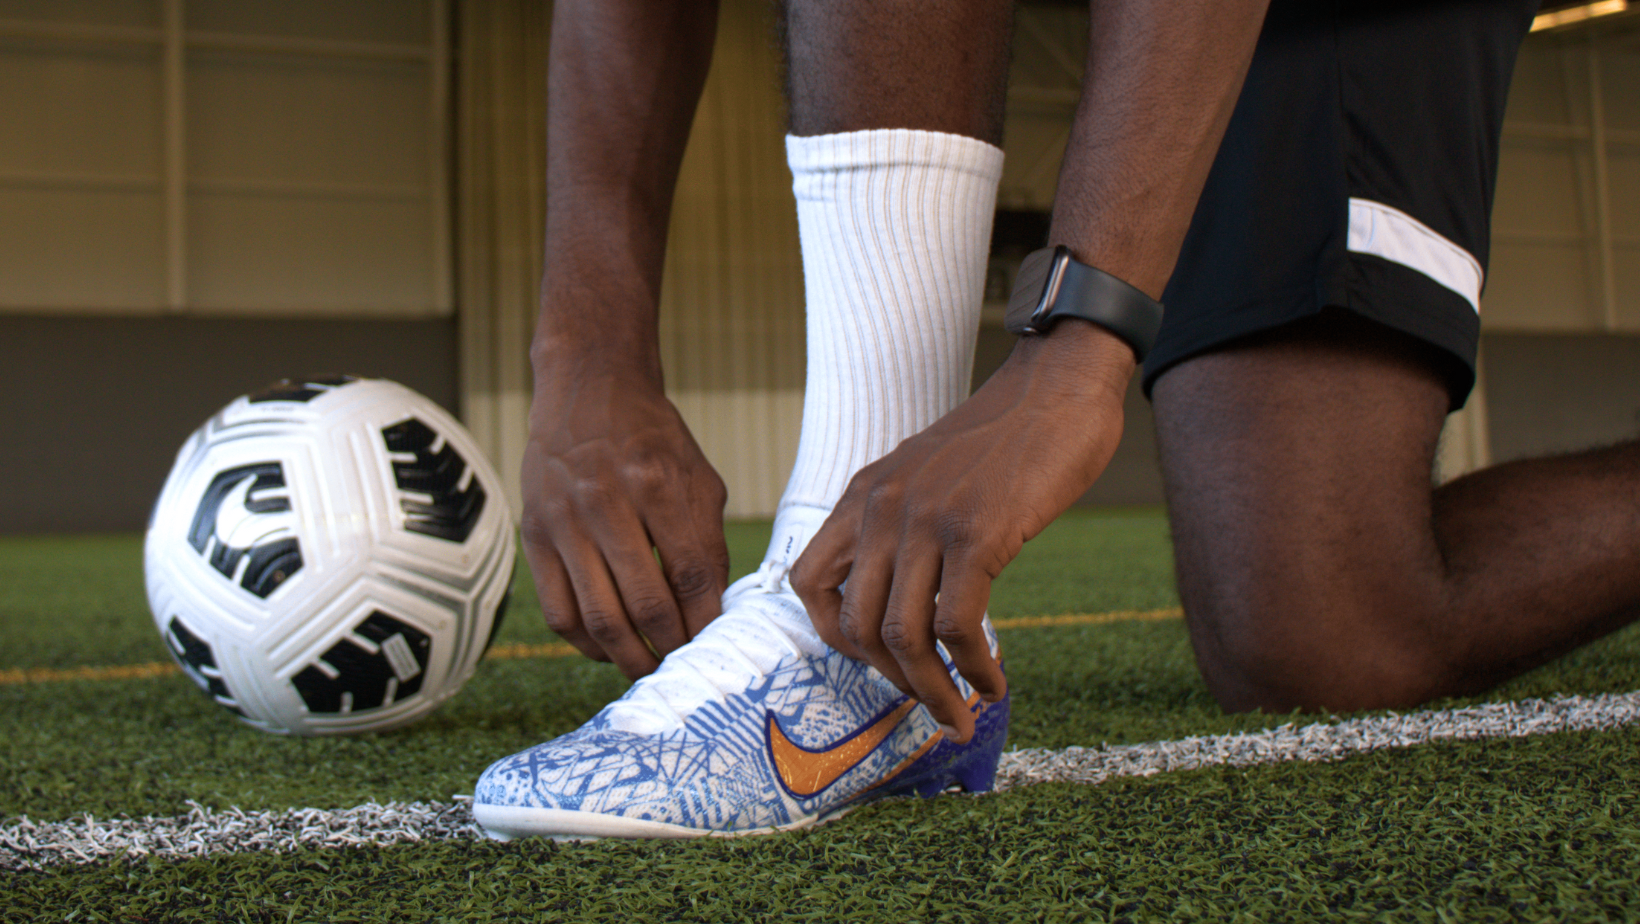 How to Treat Blisters from Soccer Cleat at Home